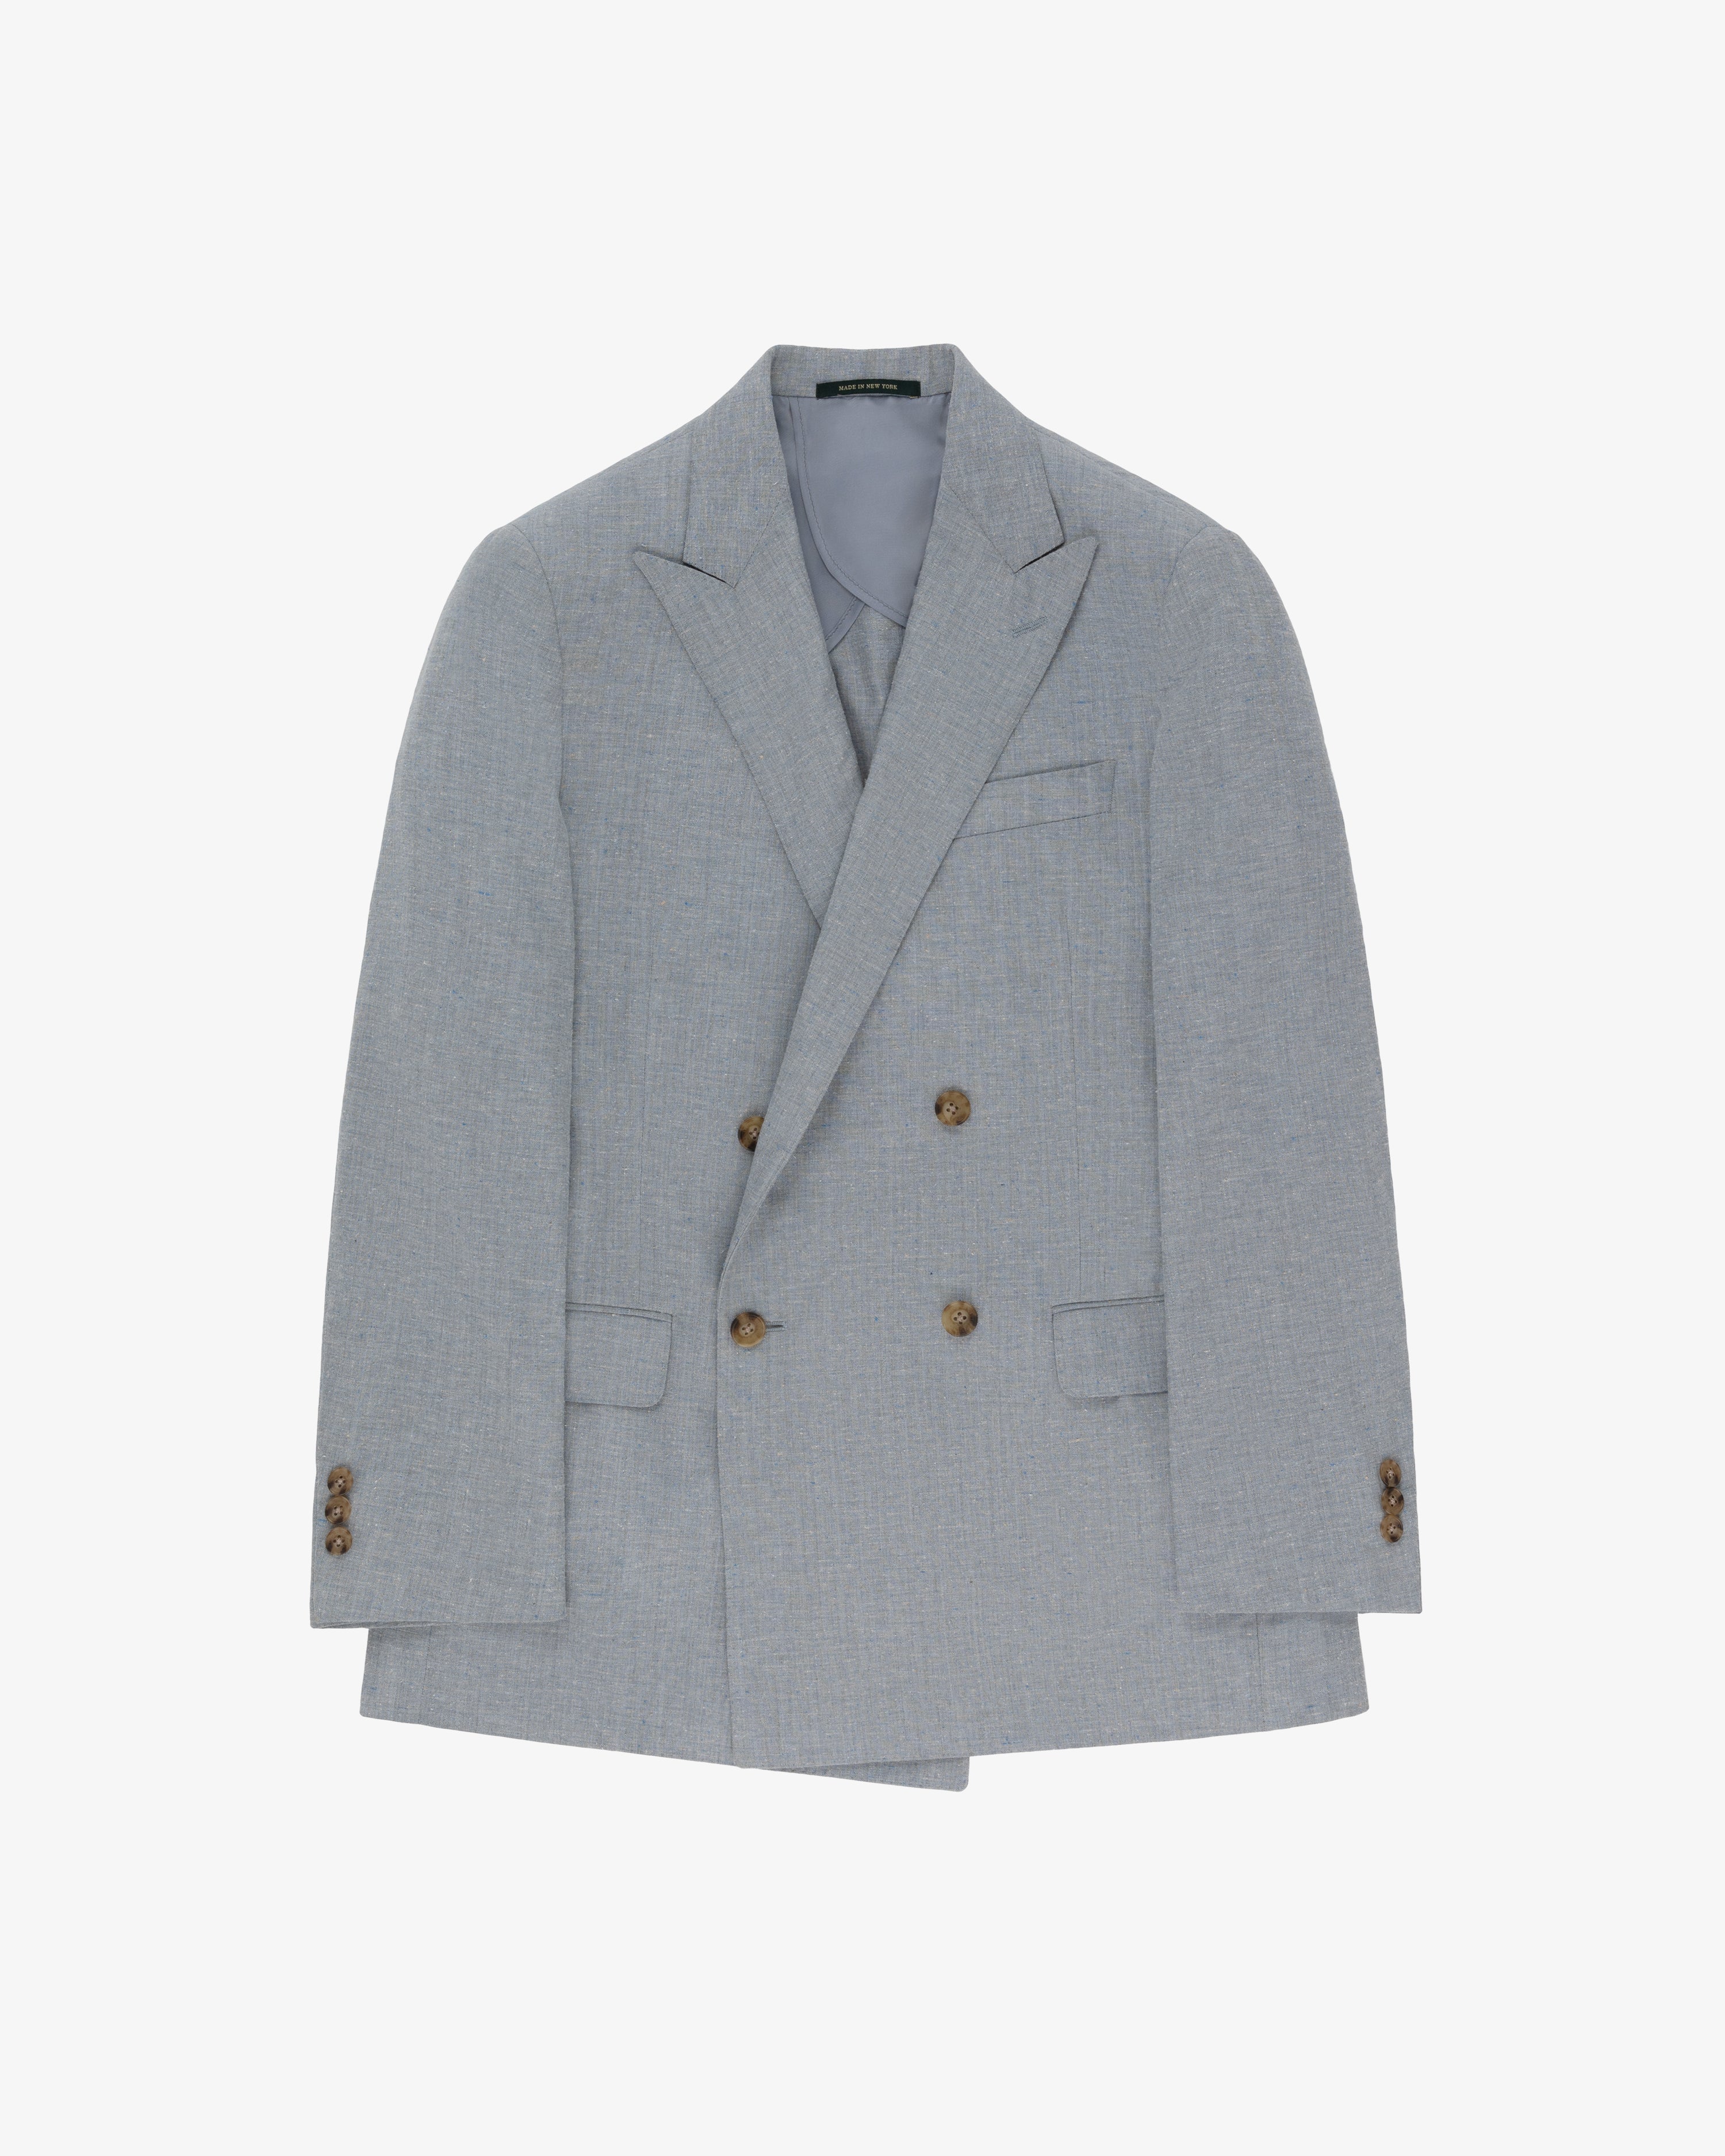 Low Button Double-Breasted Fleck Suit Jacket